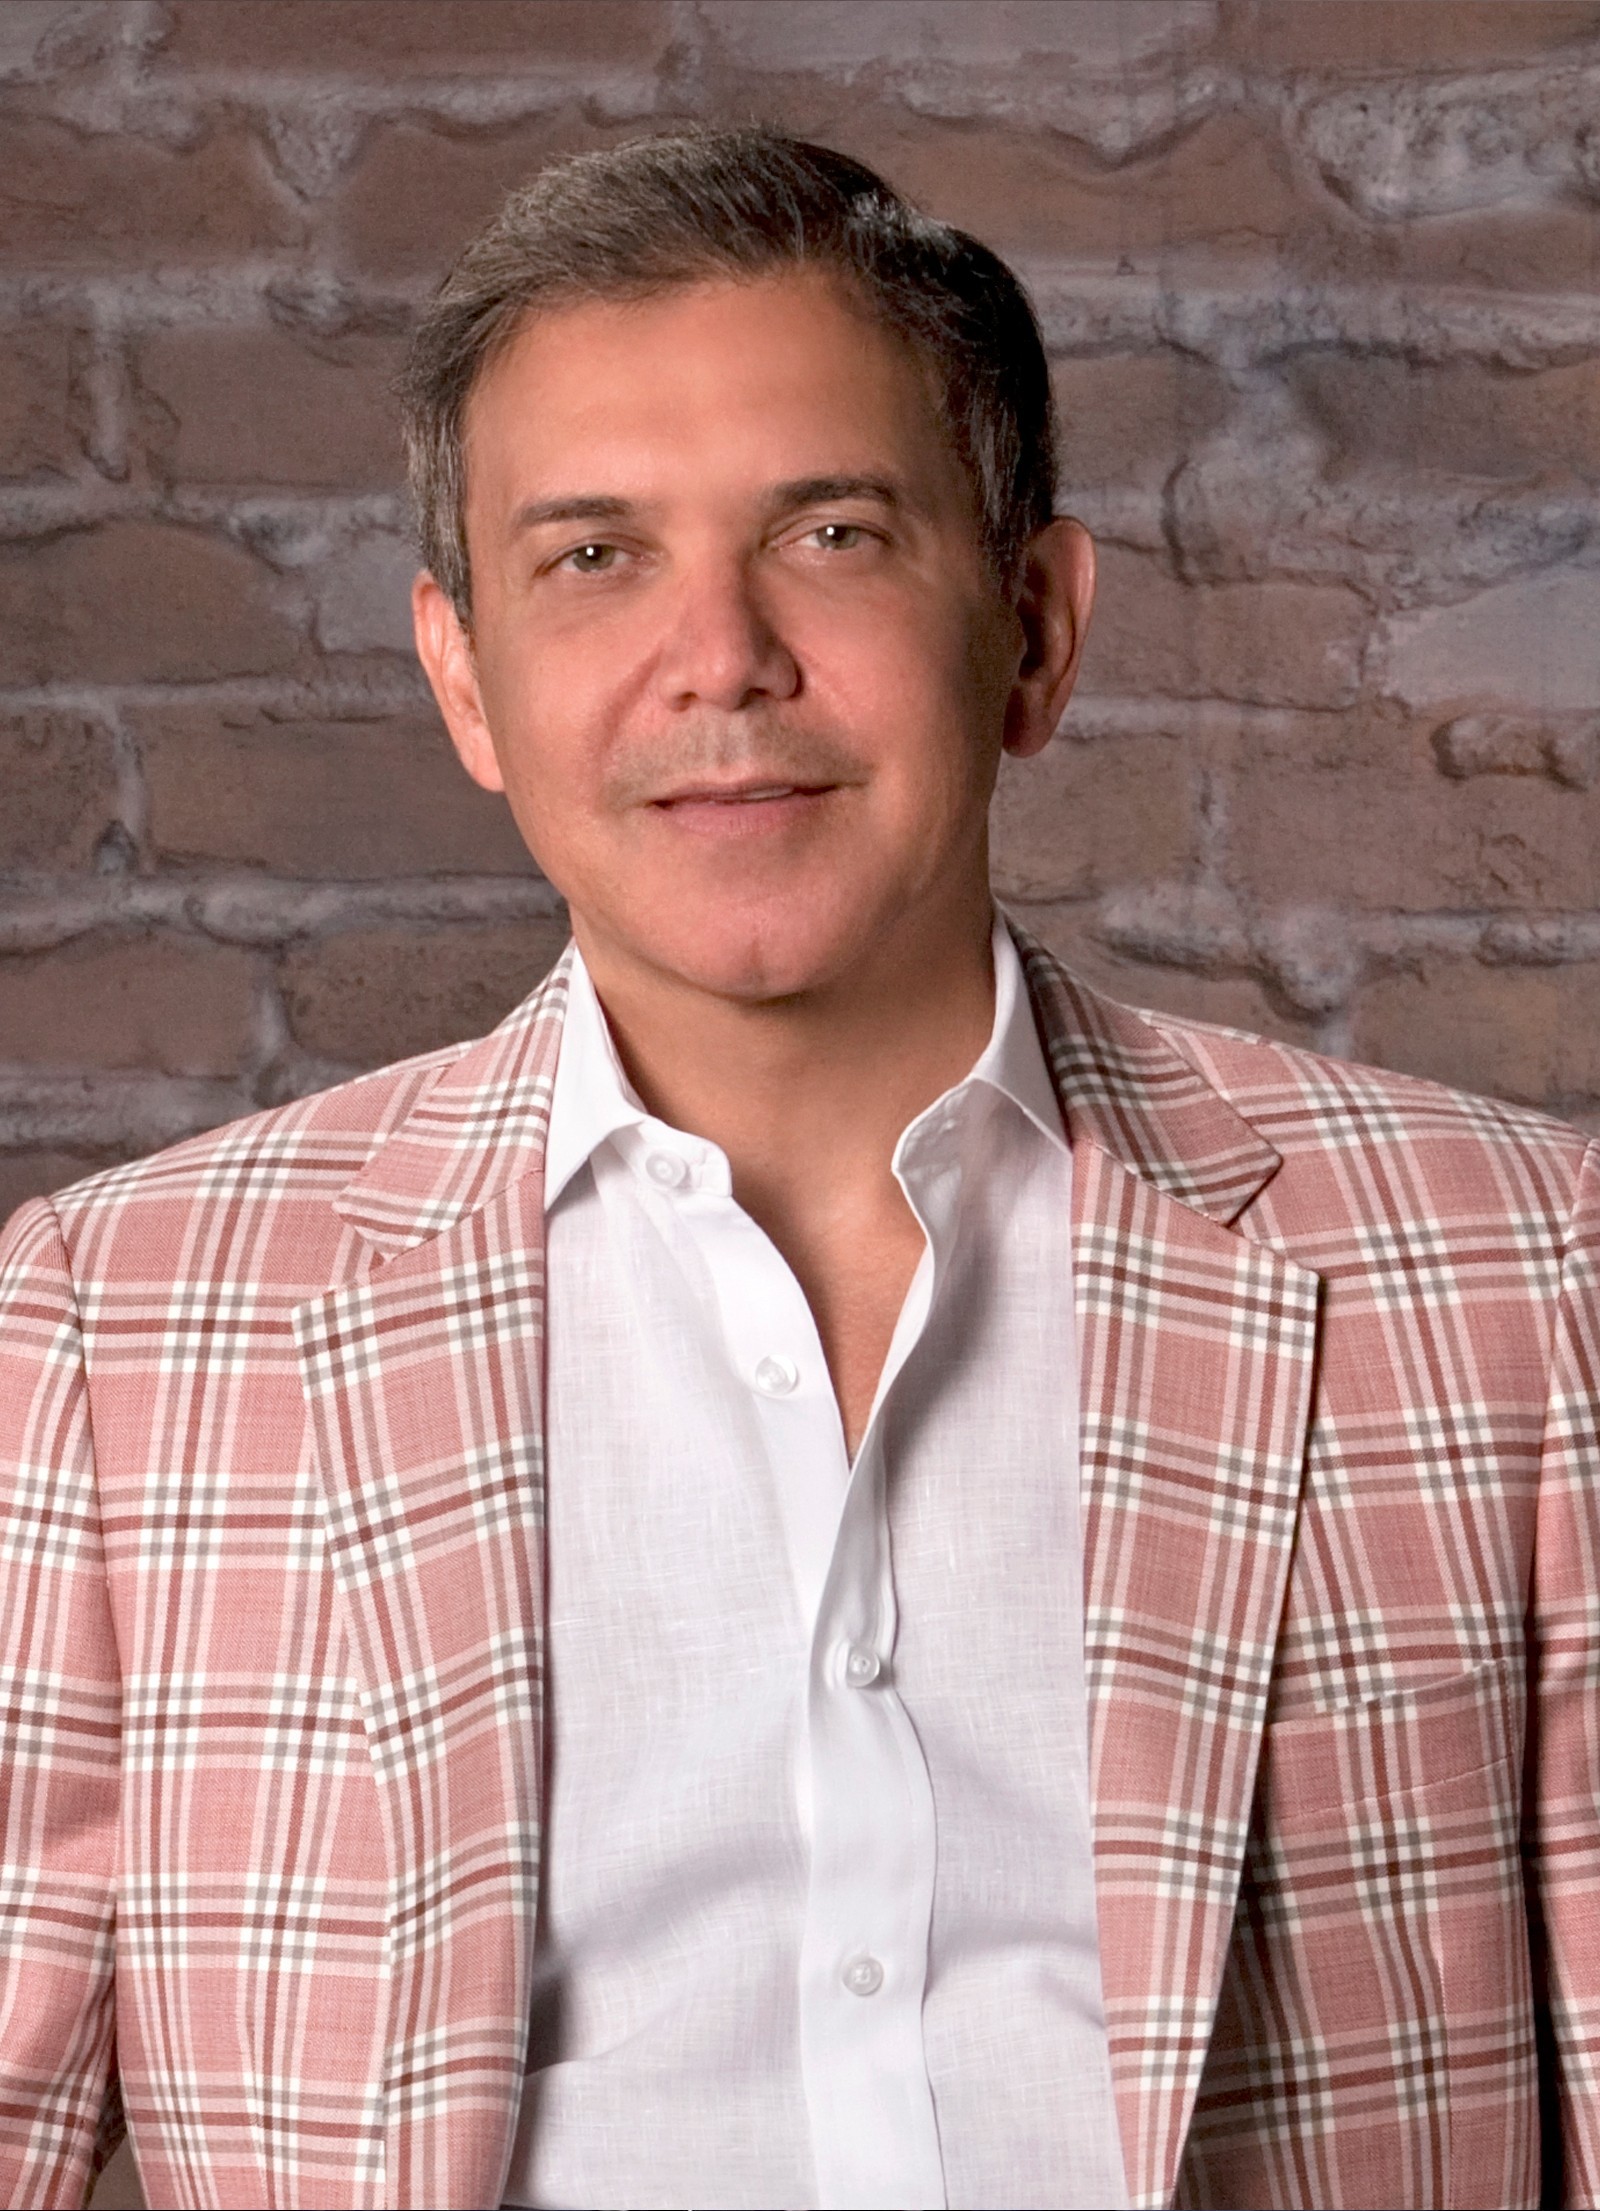 Dr. Zack Charkawi, a renowned expert in hair restoration, specializing in transplants, advanced techniques and personalized treatment plans.